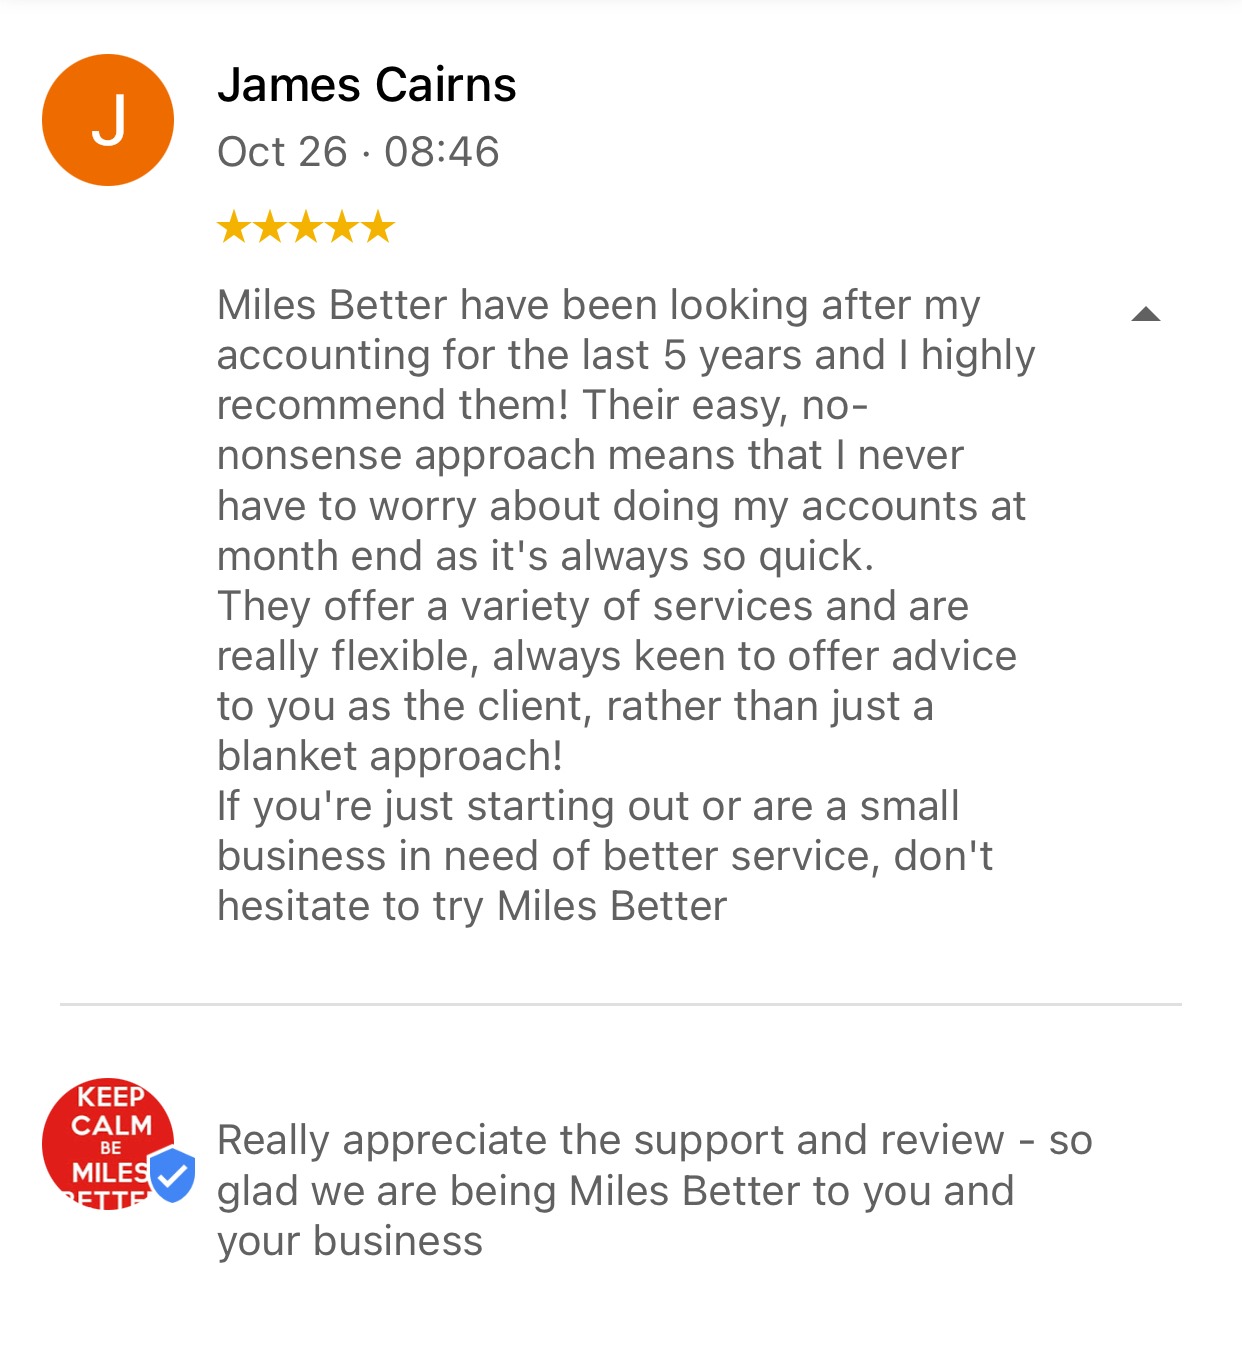 James Cairns 5 Star review